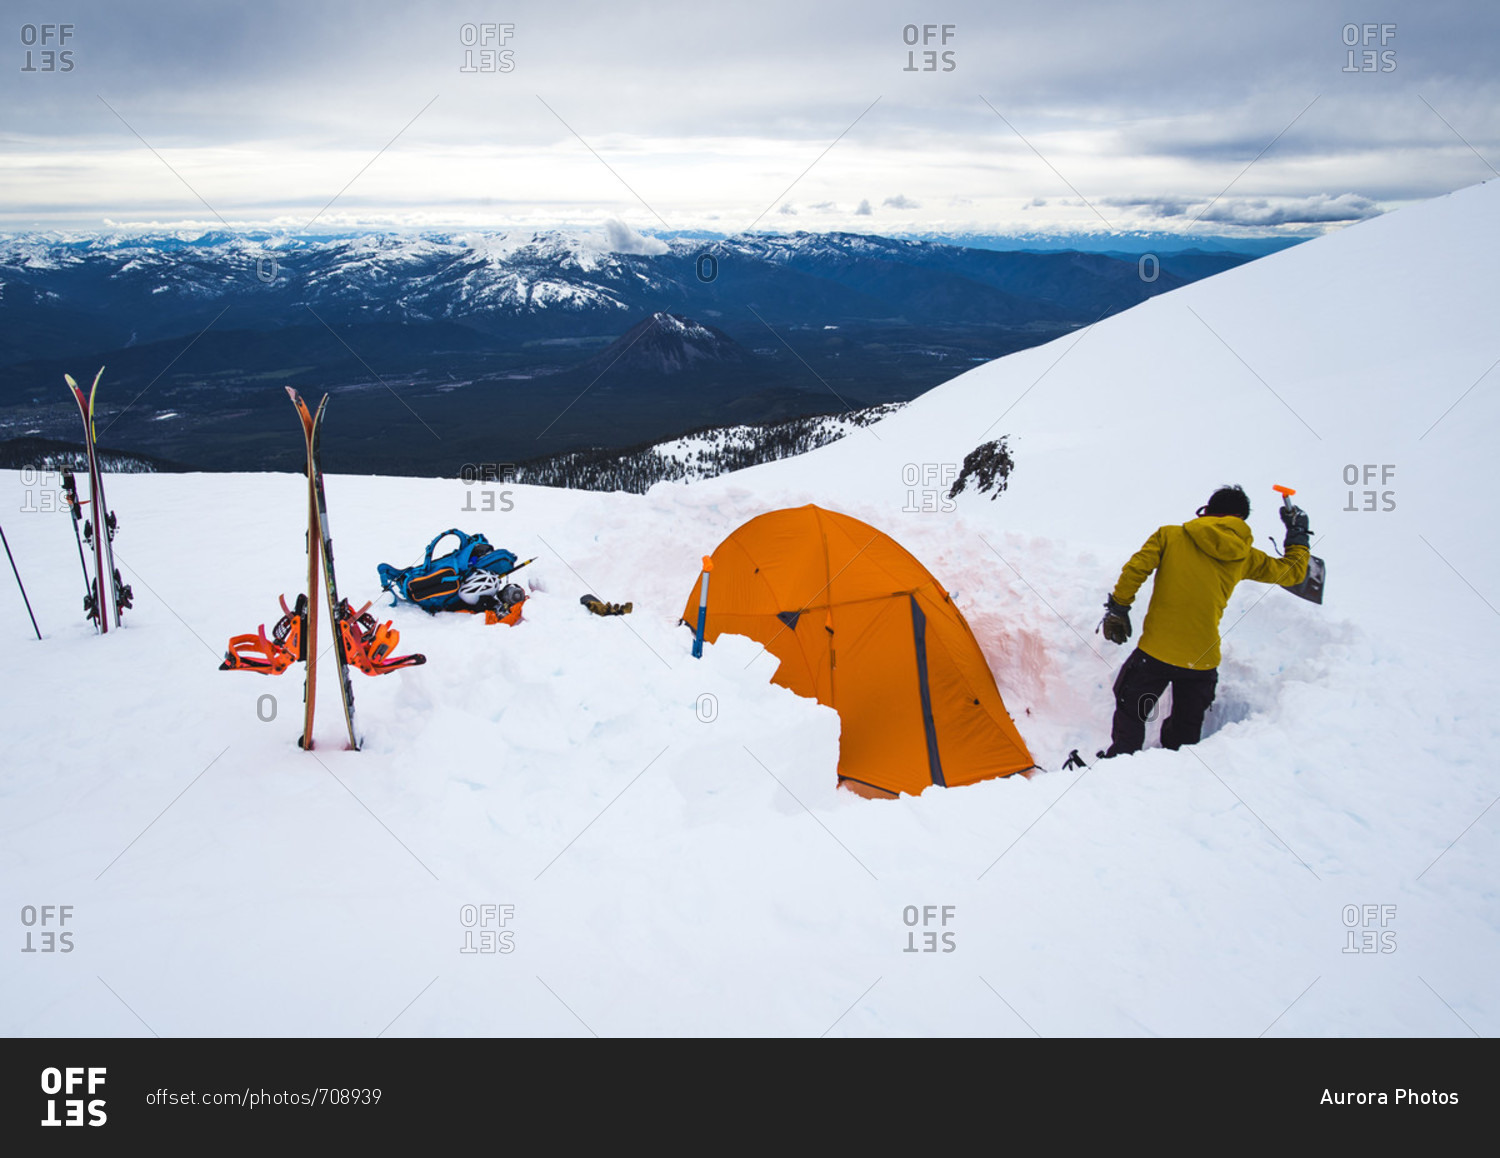 Man camping with tent in winter at Mt Shasta, California, USA